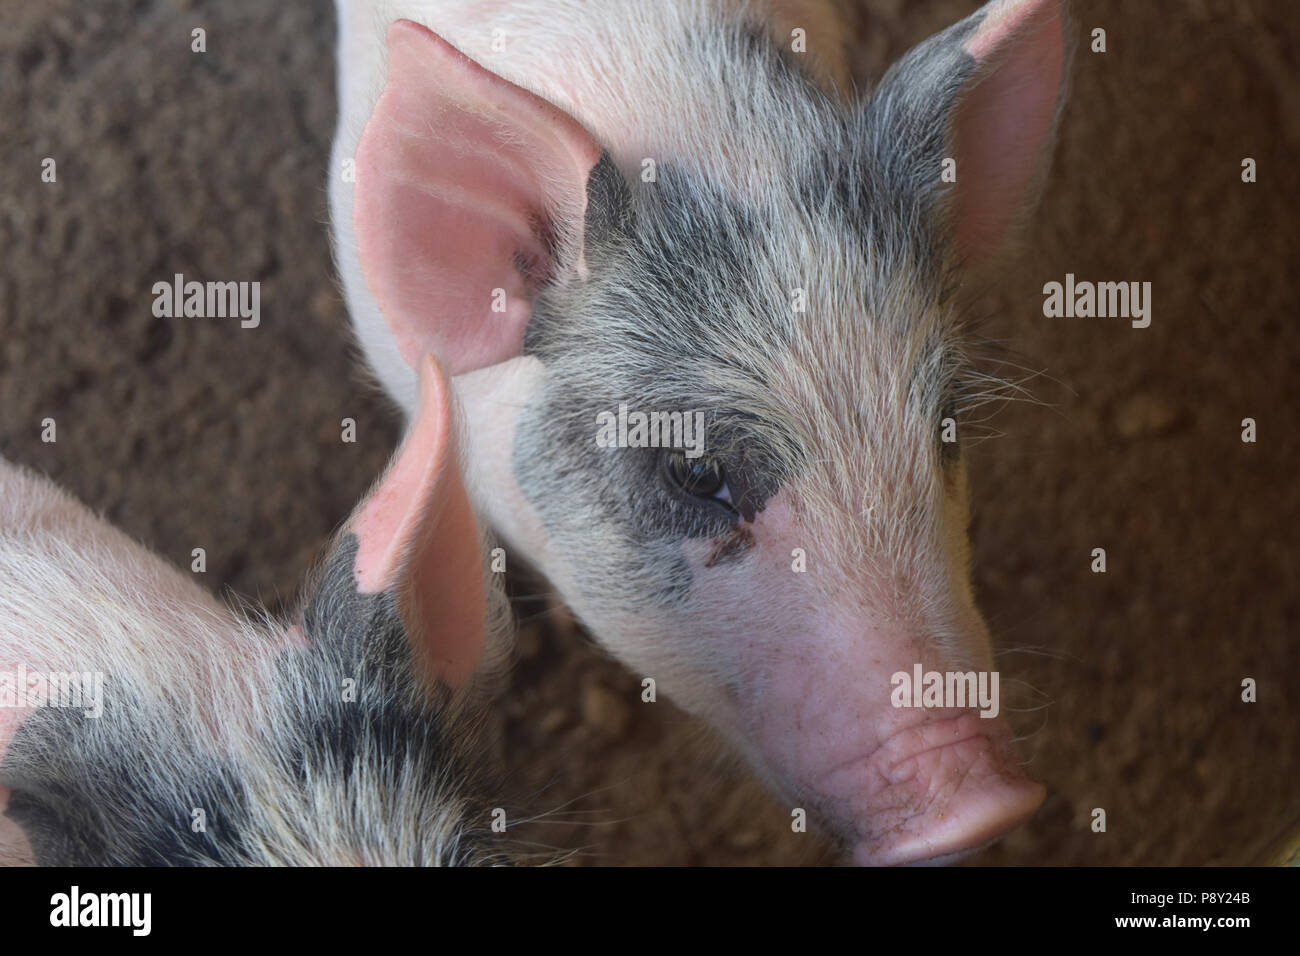 Pig with black and whtie patches on his face. Stock Photo